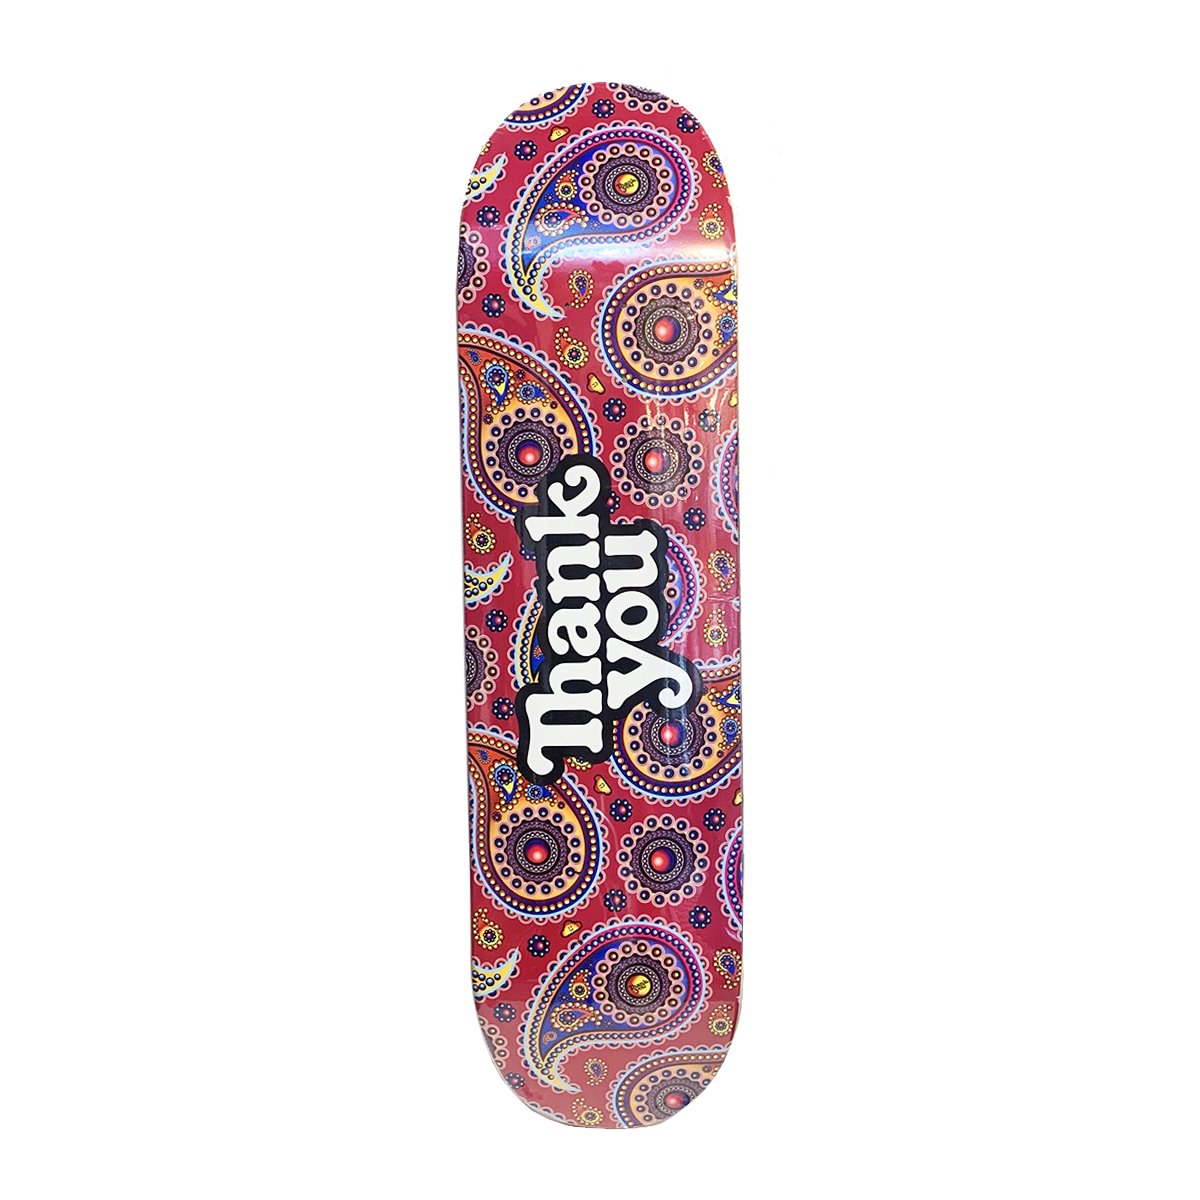 30%off【THANK YOU】サンキュー THANK YOU PAISLEY LOGO DECK 8.5［送料無料］